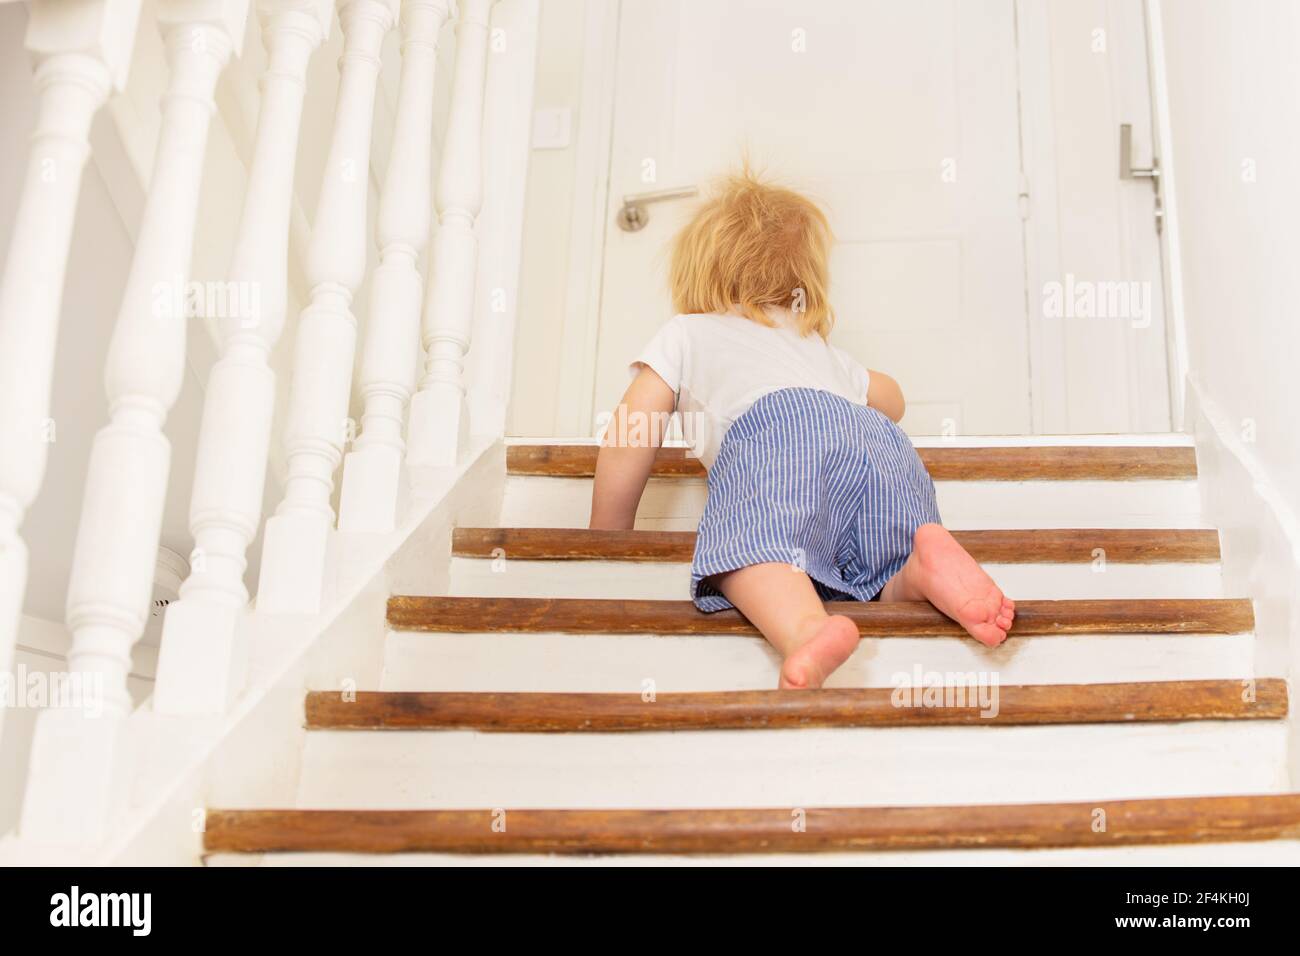 View from behind of a toddler climbing staircase Stock Photo - Alamy